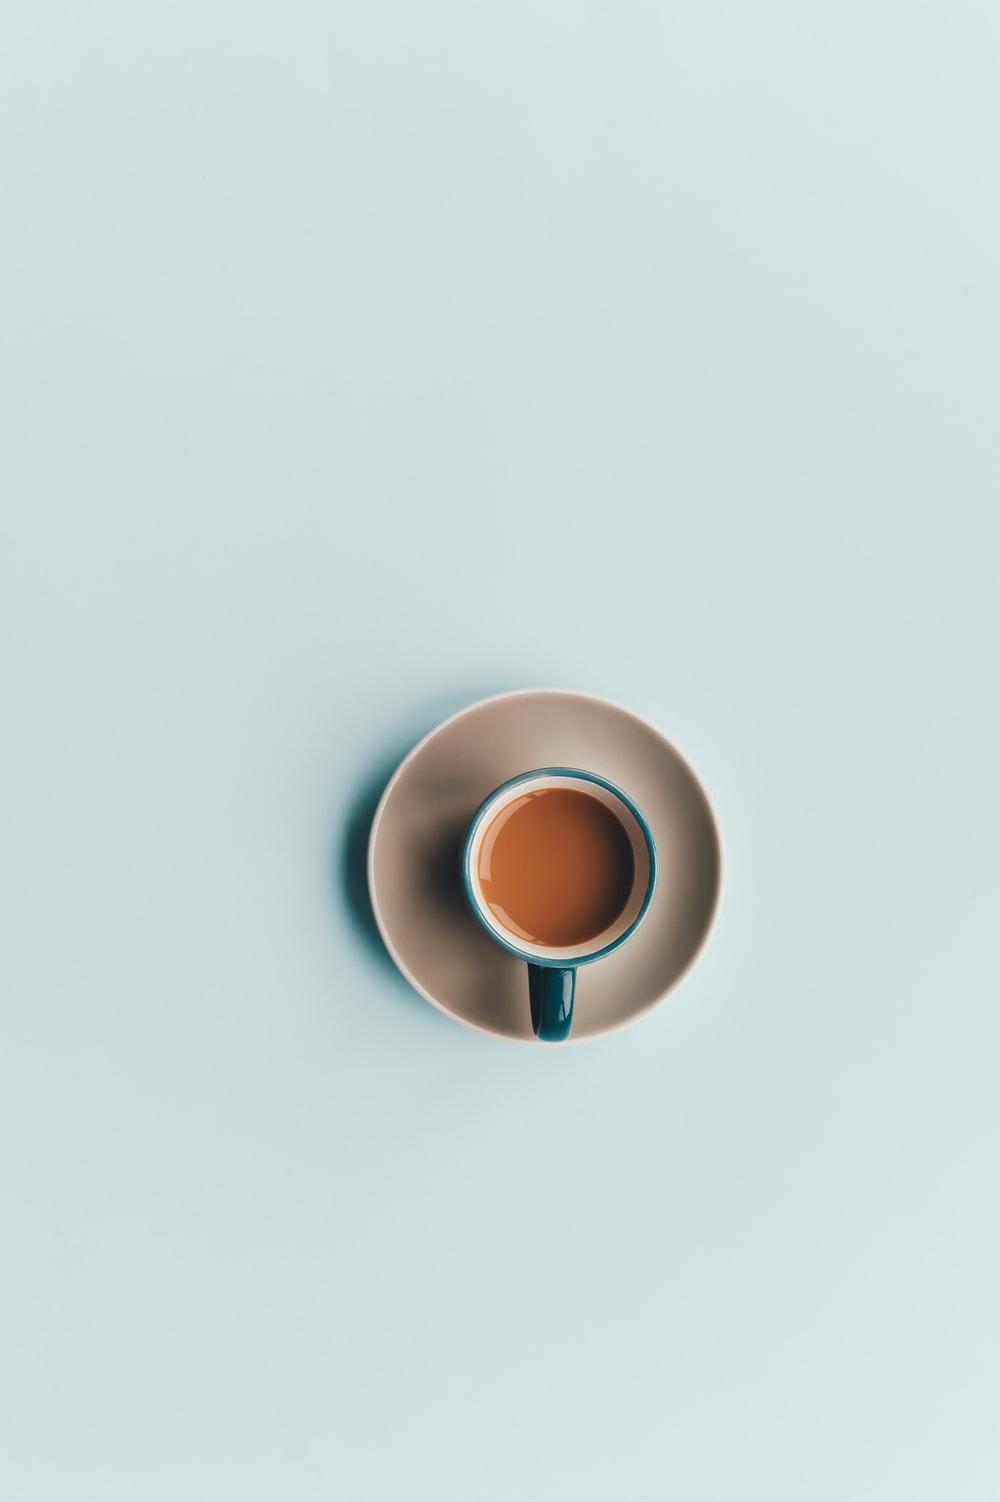 Coffee Picture. Download Free Image